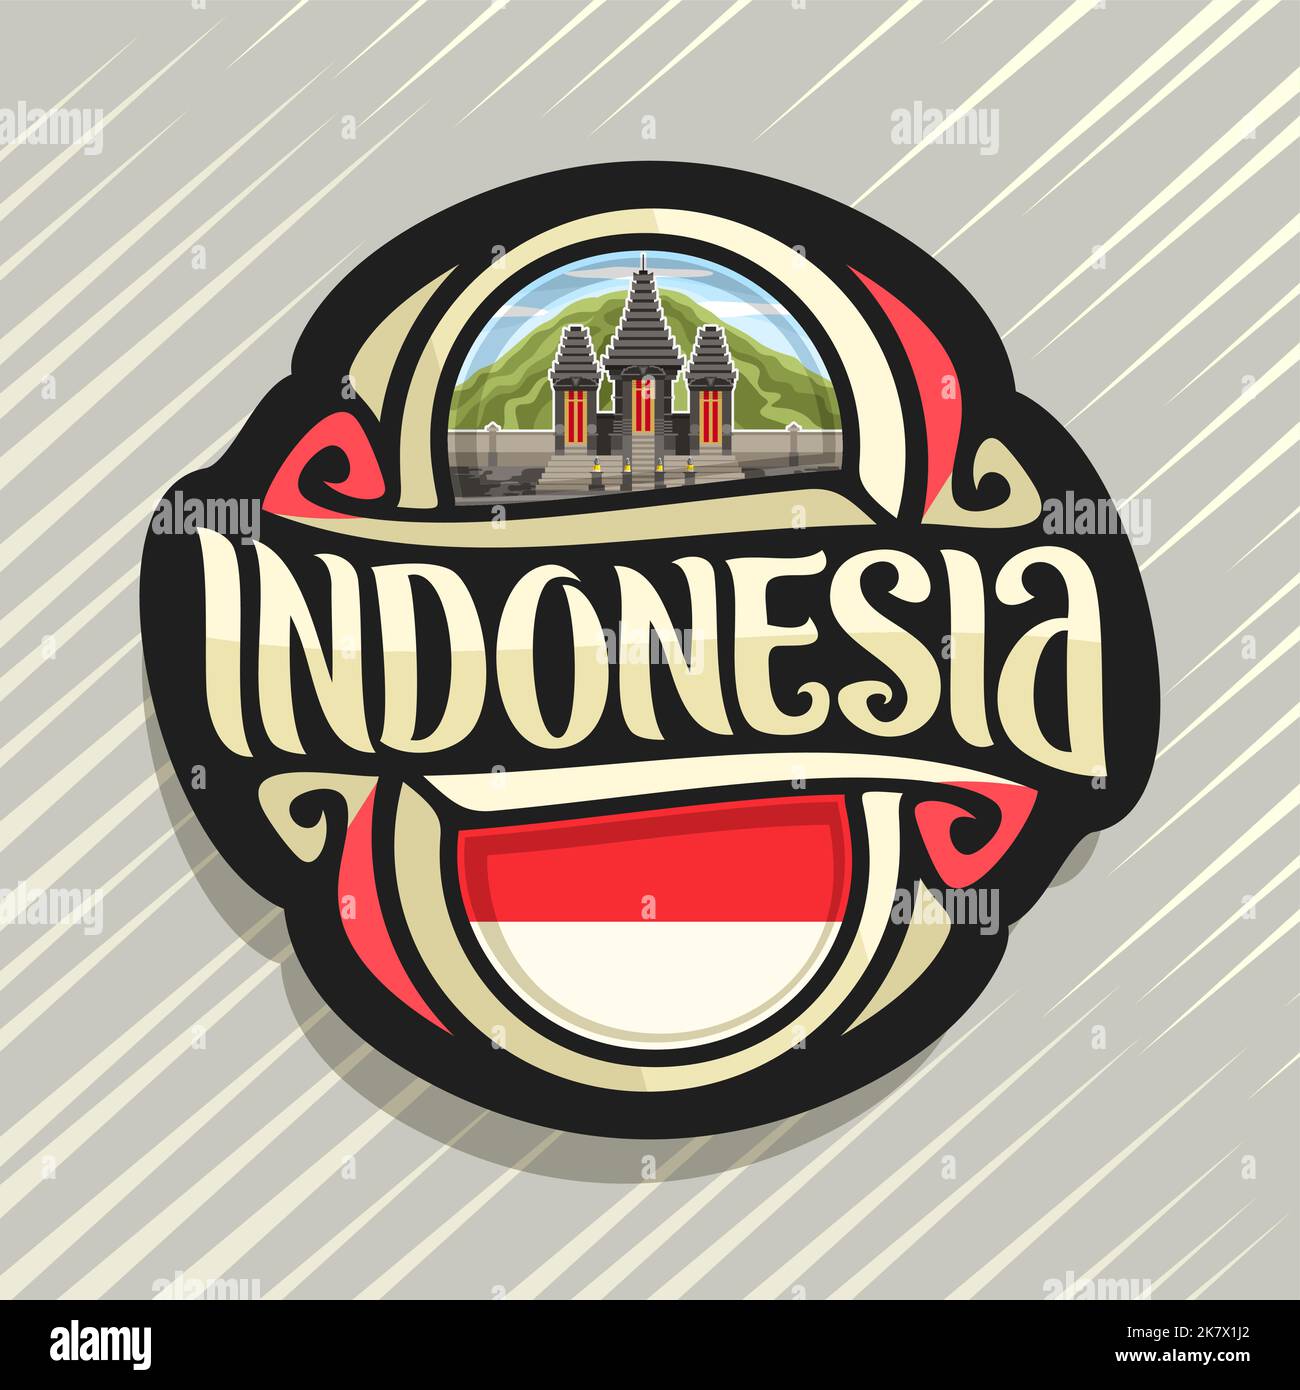 Vector logo for Indonesia country, fridge magnet with indonesian state flag, original brush typeface for word indonesia and national indonesian symbol Stock Vector